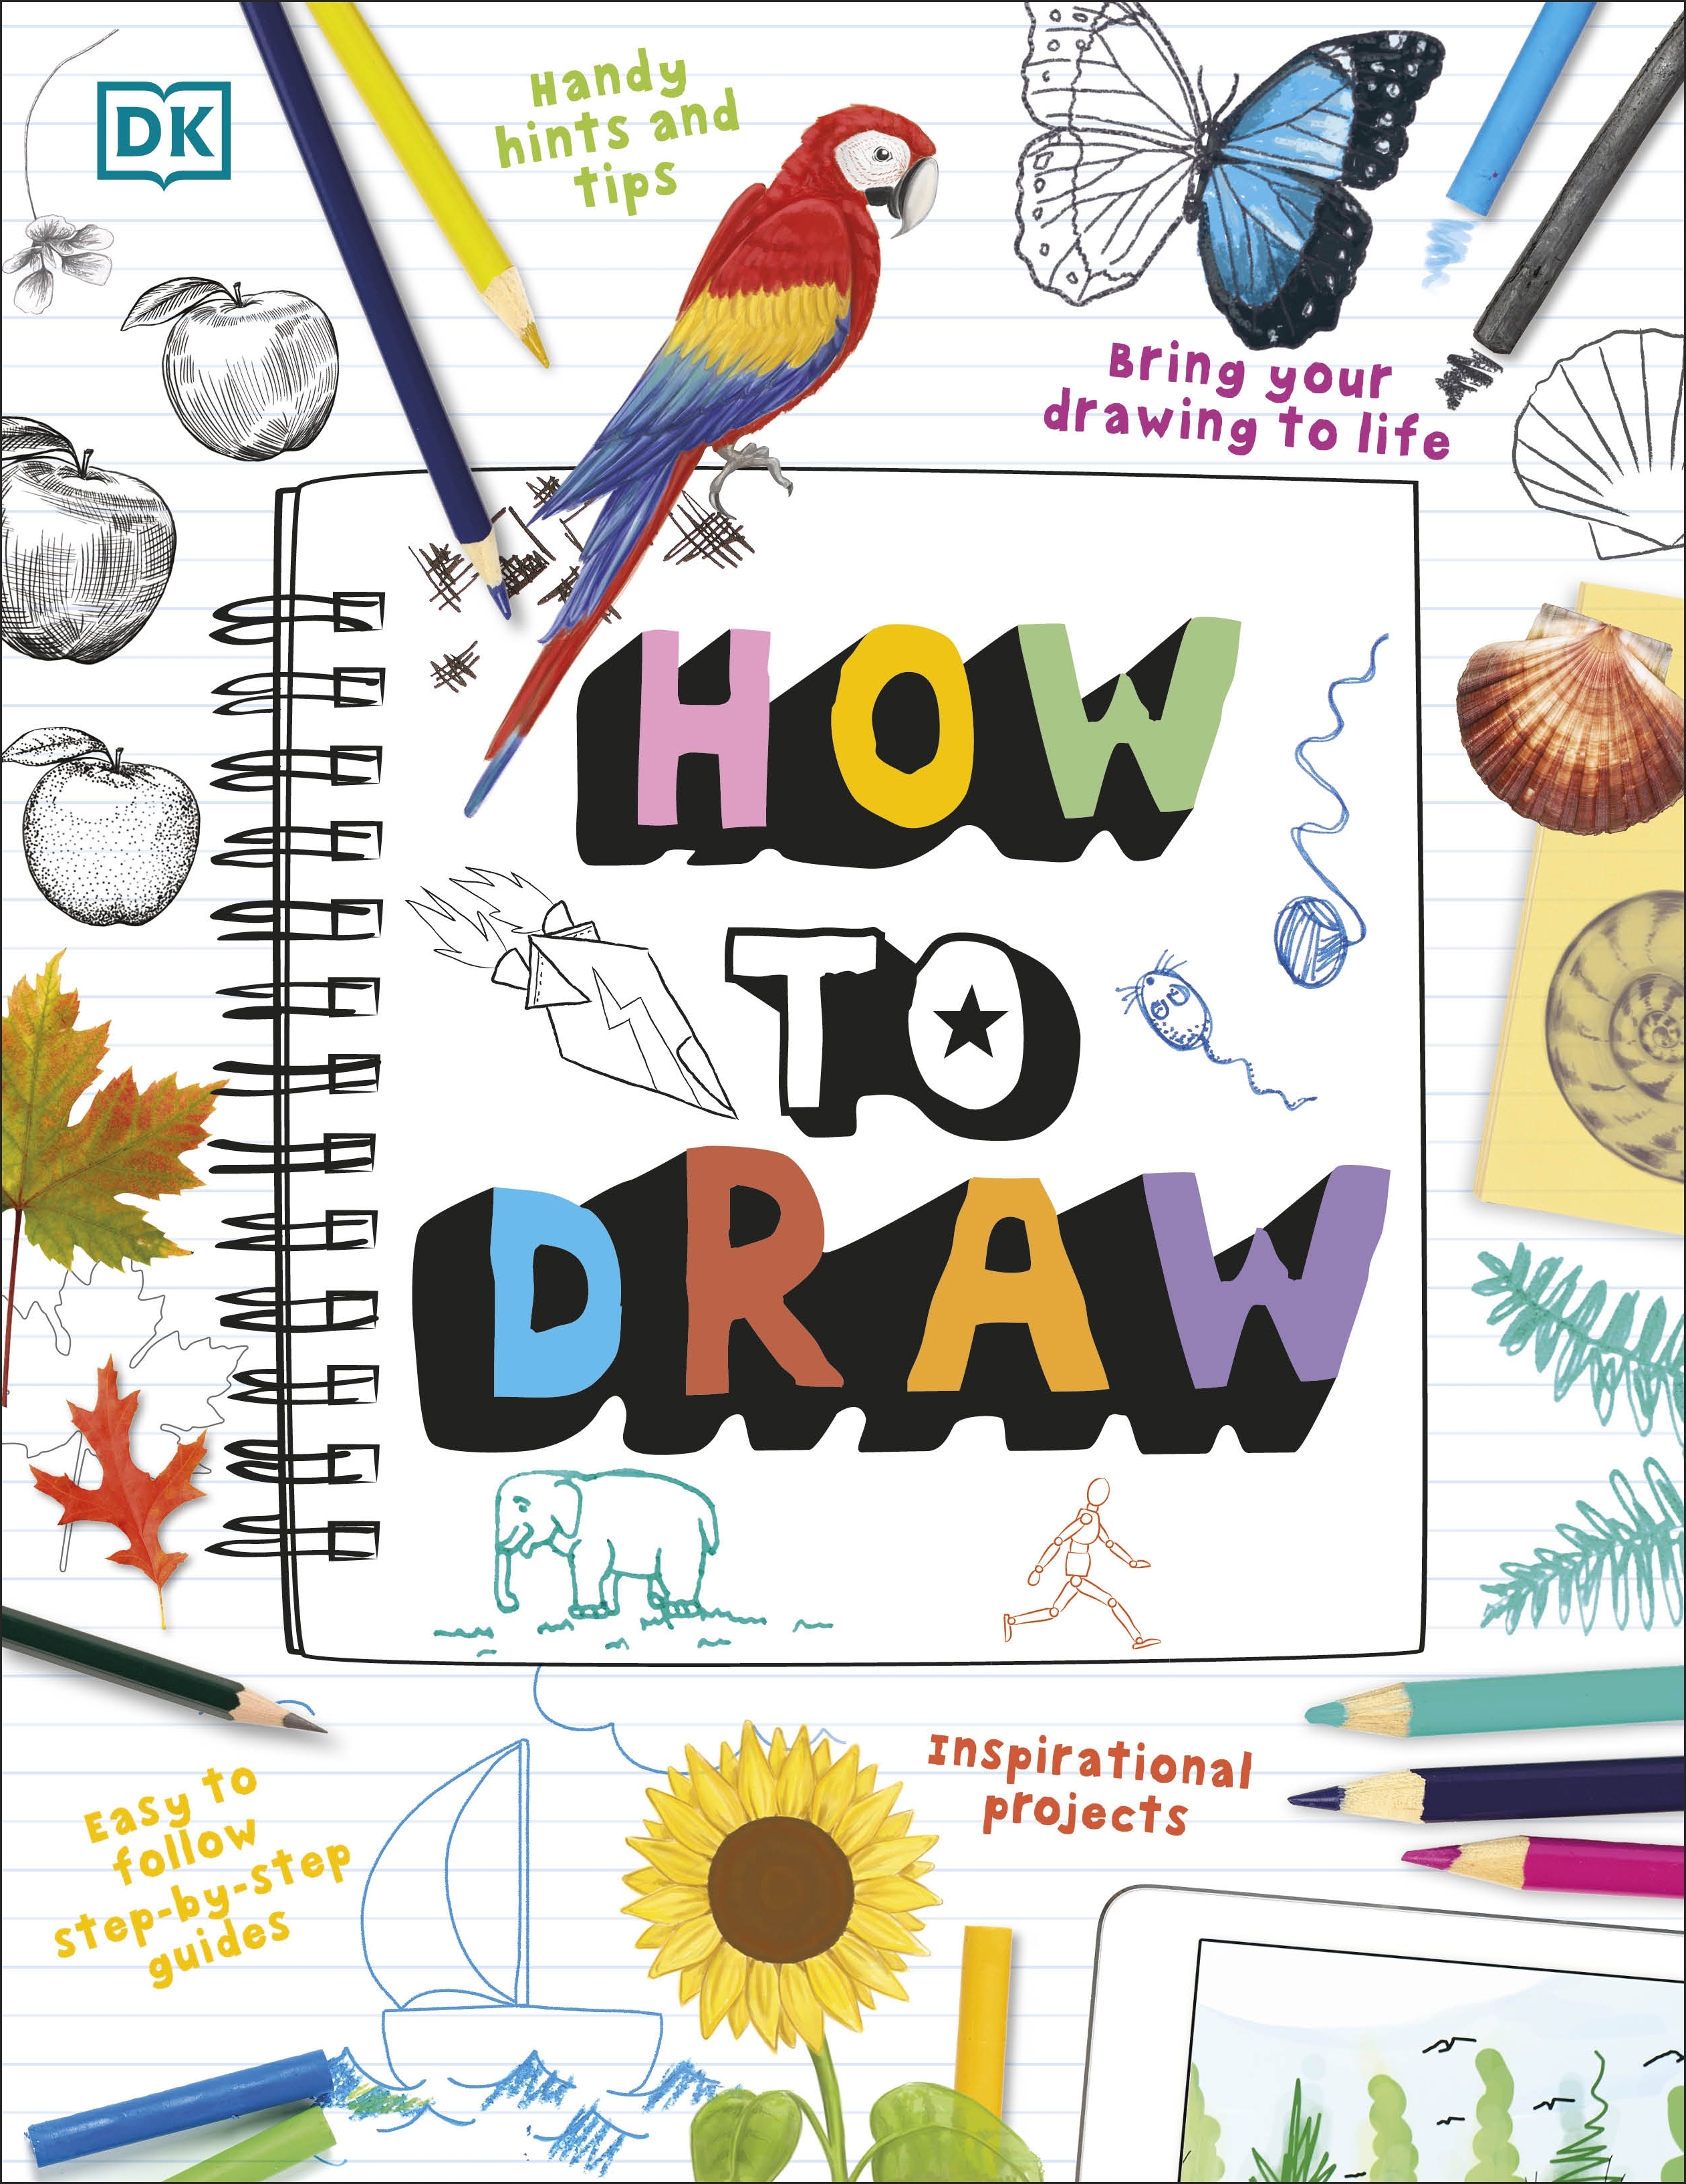 Step-by-step drawing book